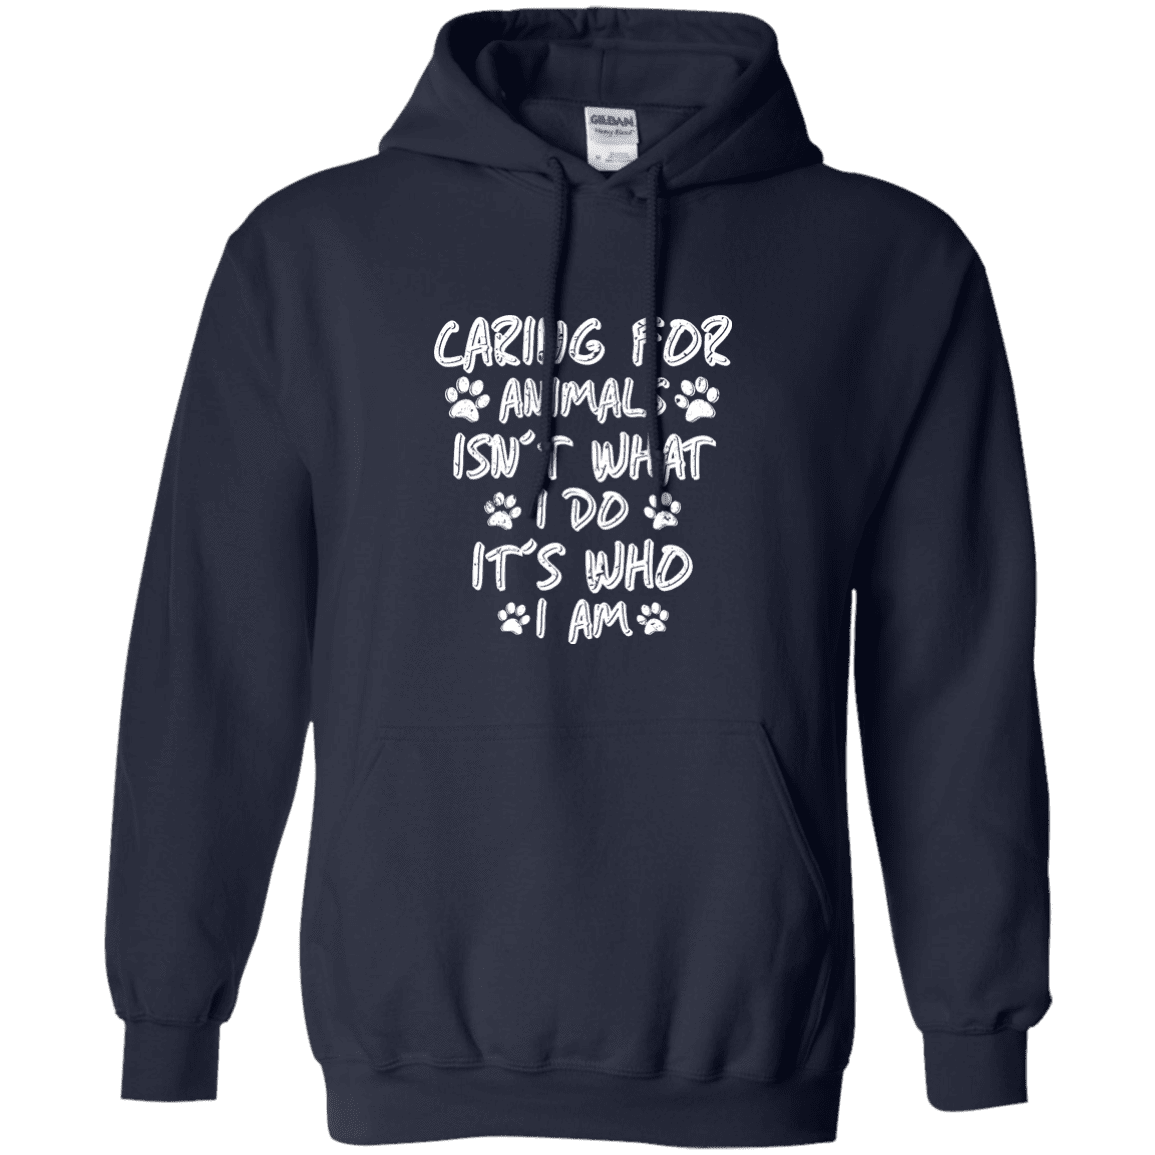 Caring For Animals - Hoodie.